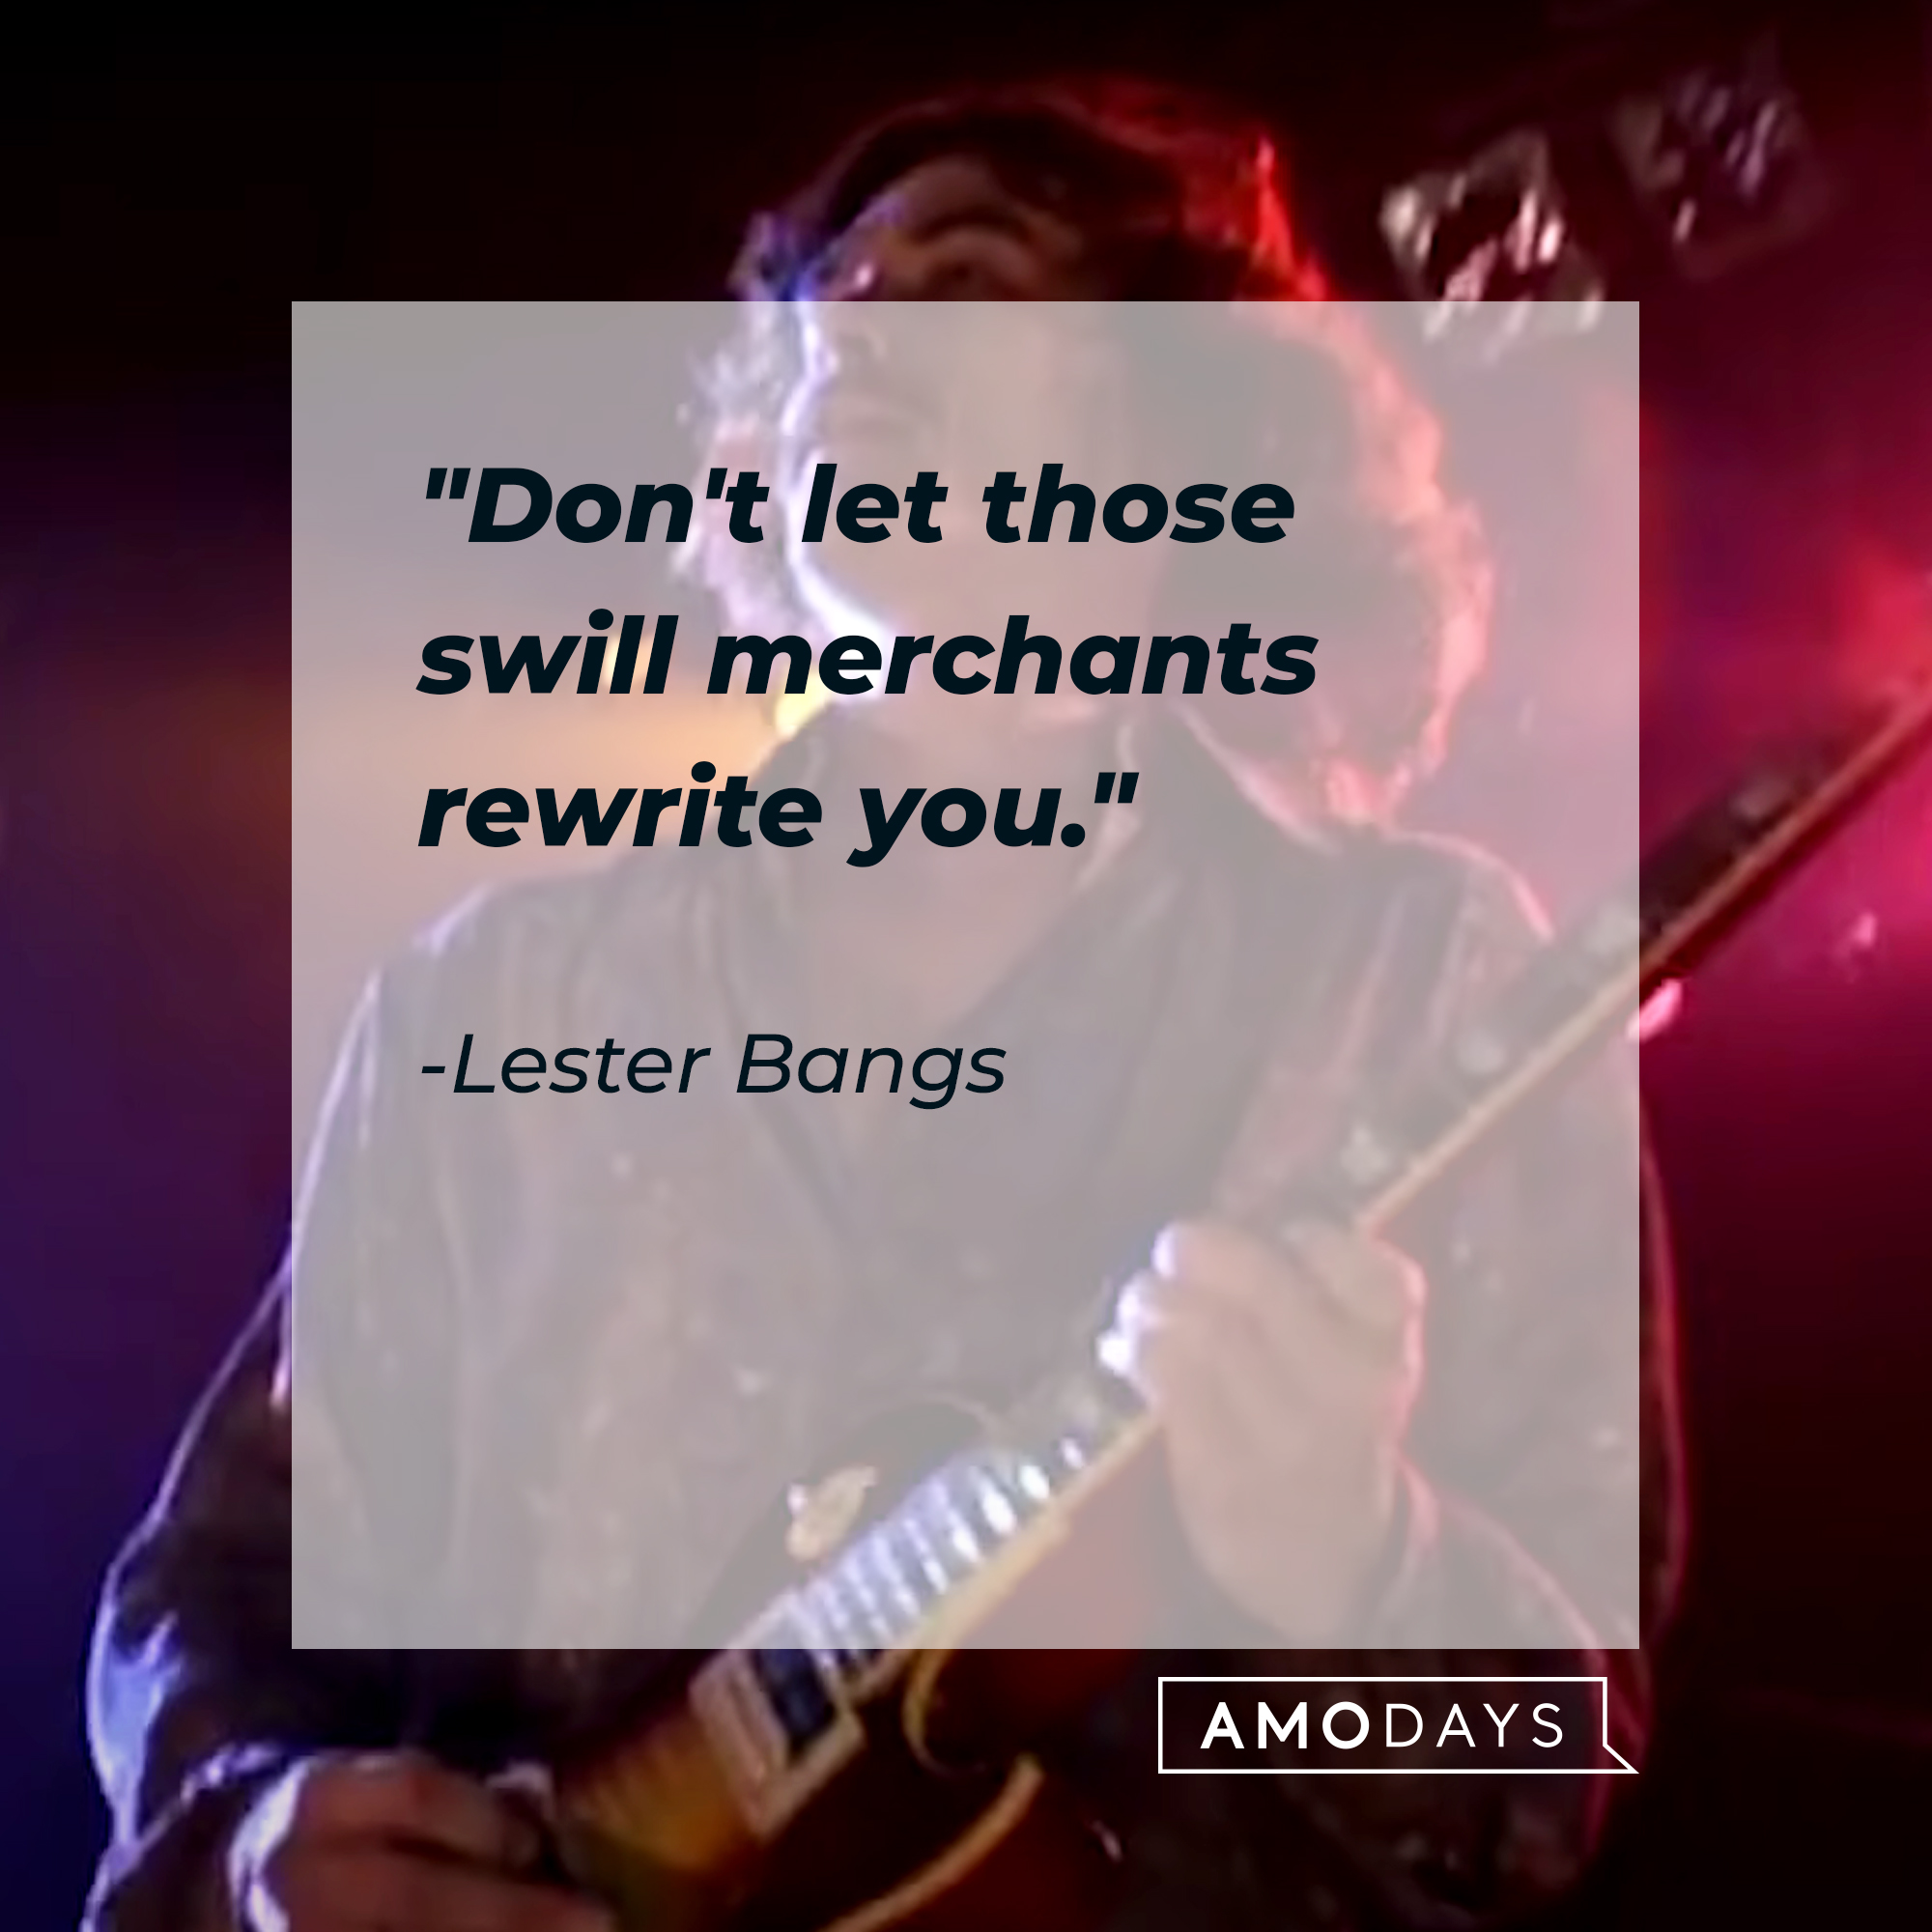 Lester Bang's quote: "Don't let those swill merchants rewrite you." | Source: Facebook/AlmostFamousTheMovie